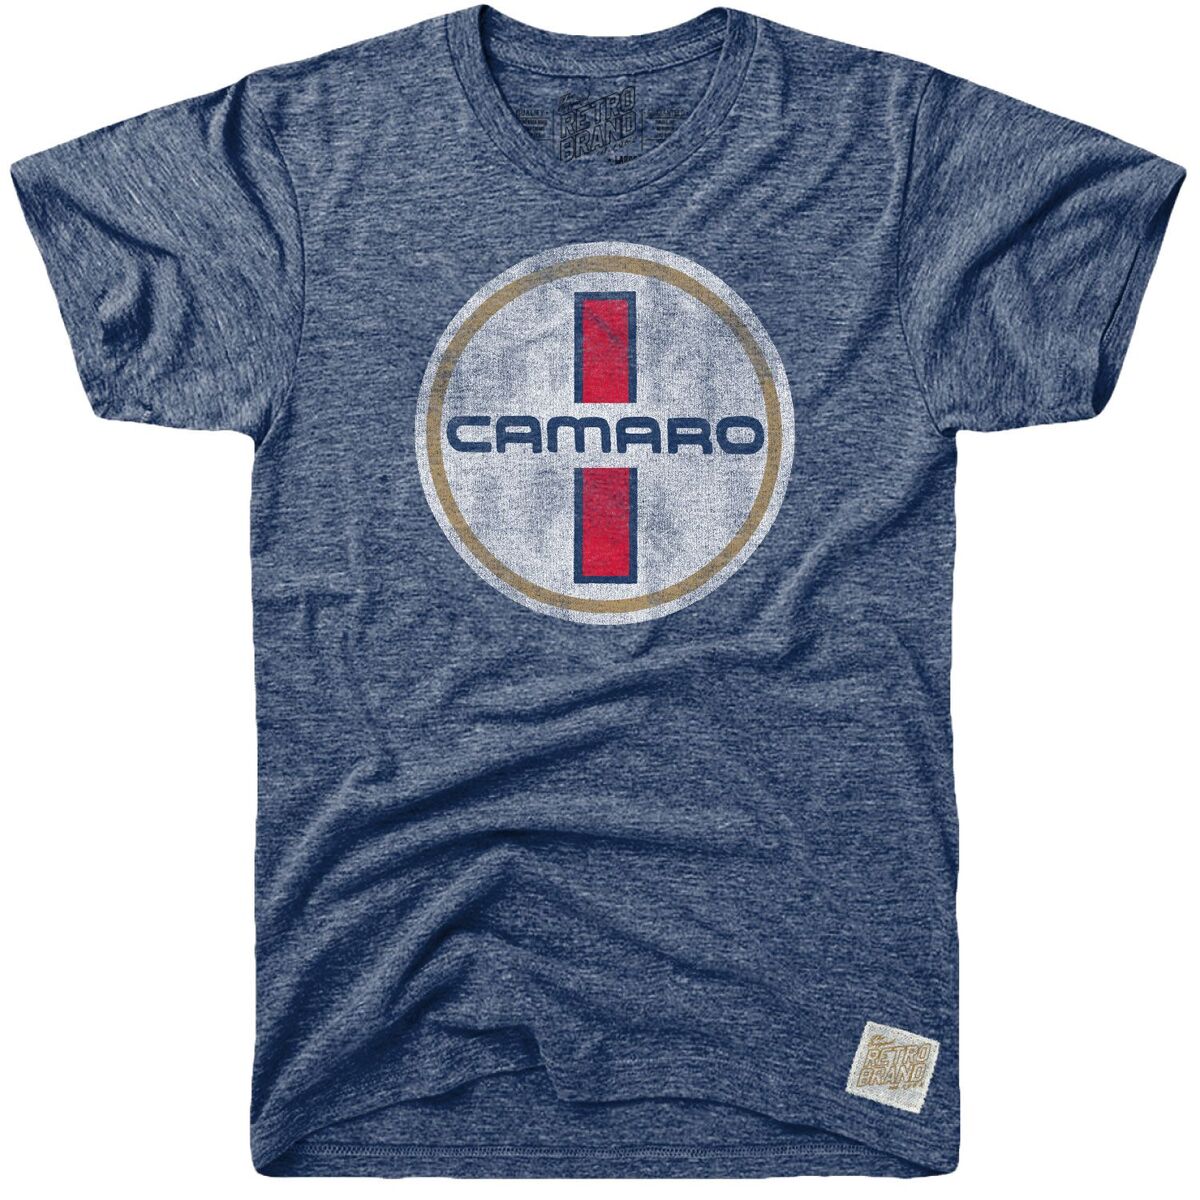 Camaro badge logo in white blue red and gold on our tri-blend unisex tee in streaky blue.